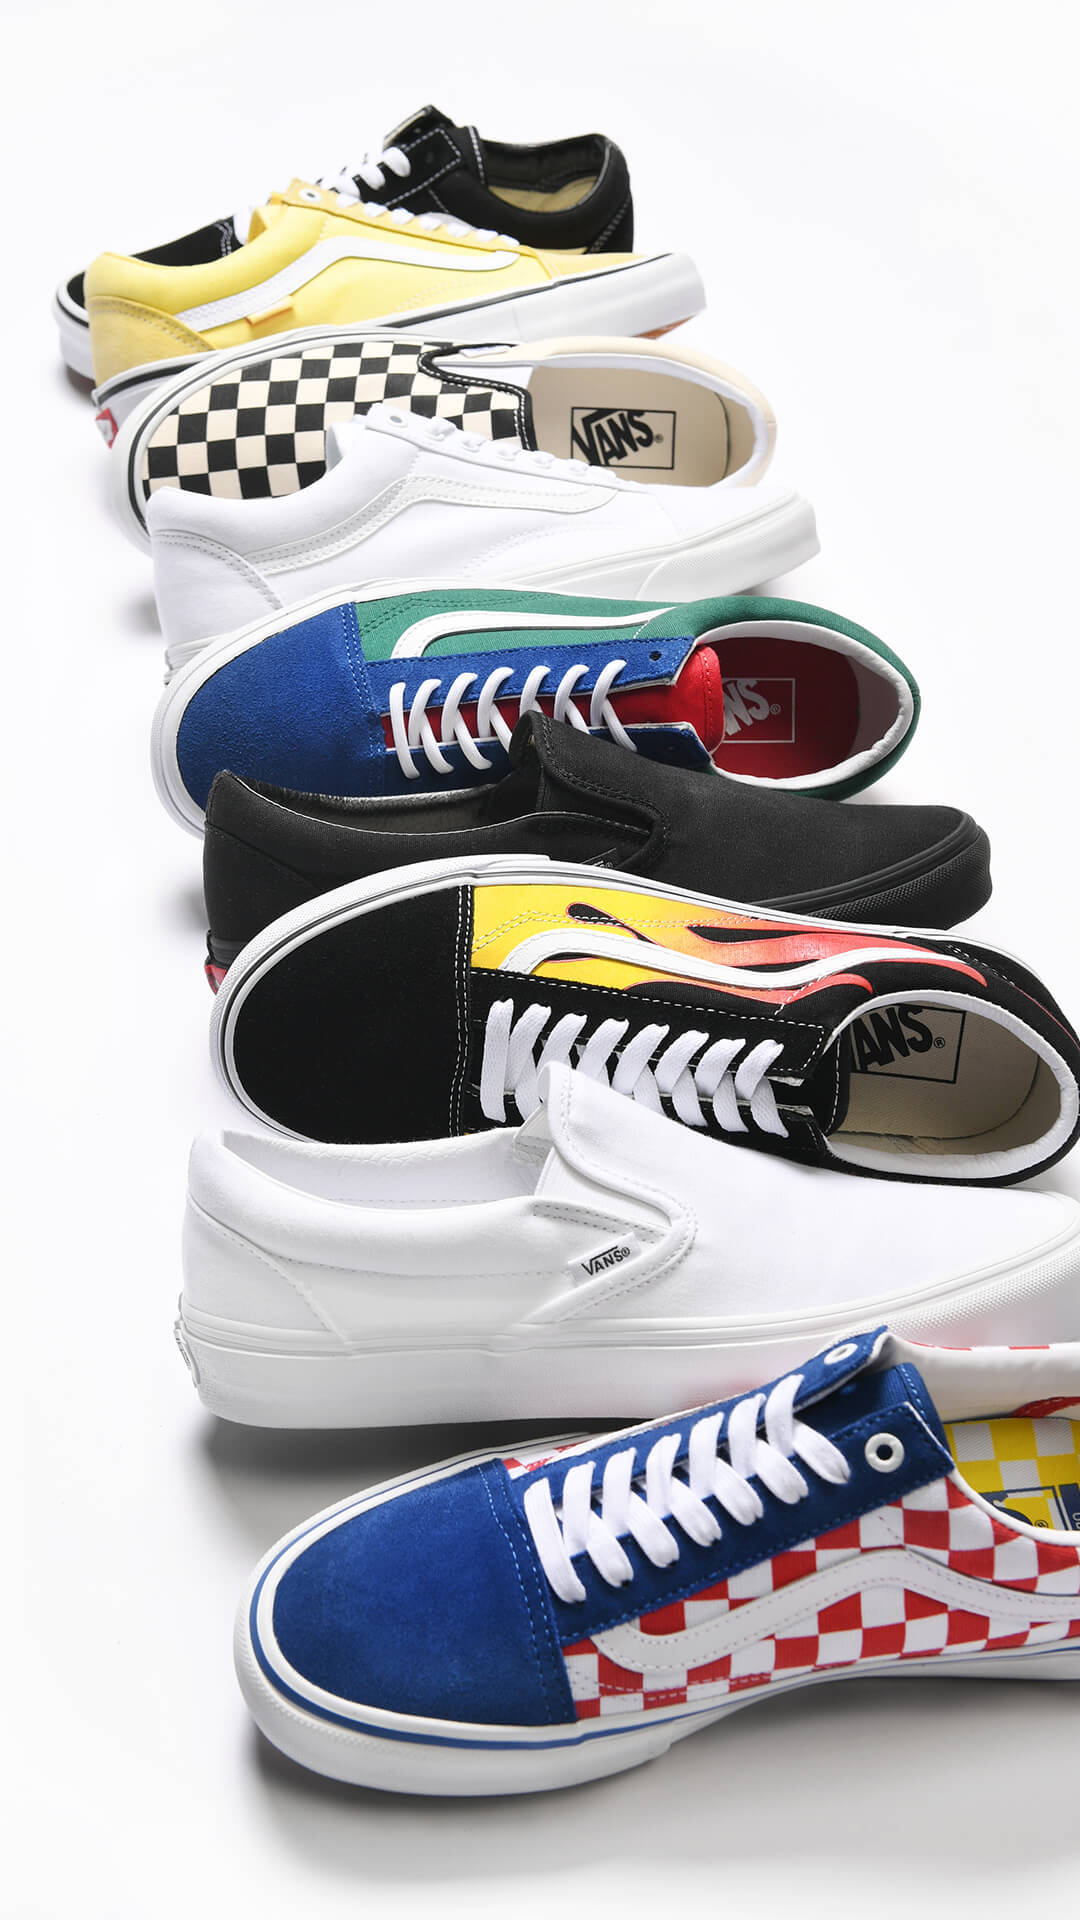 VANS FOR THE PERFECT GIFT - SHOP VANS SHOES